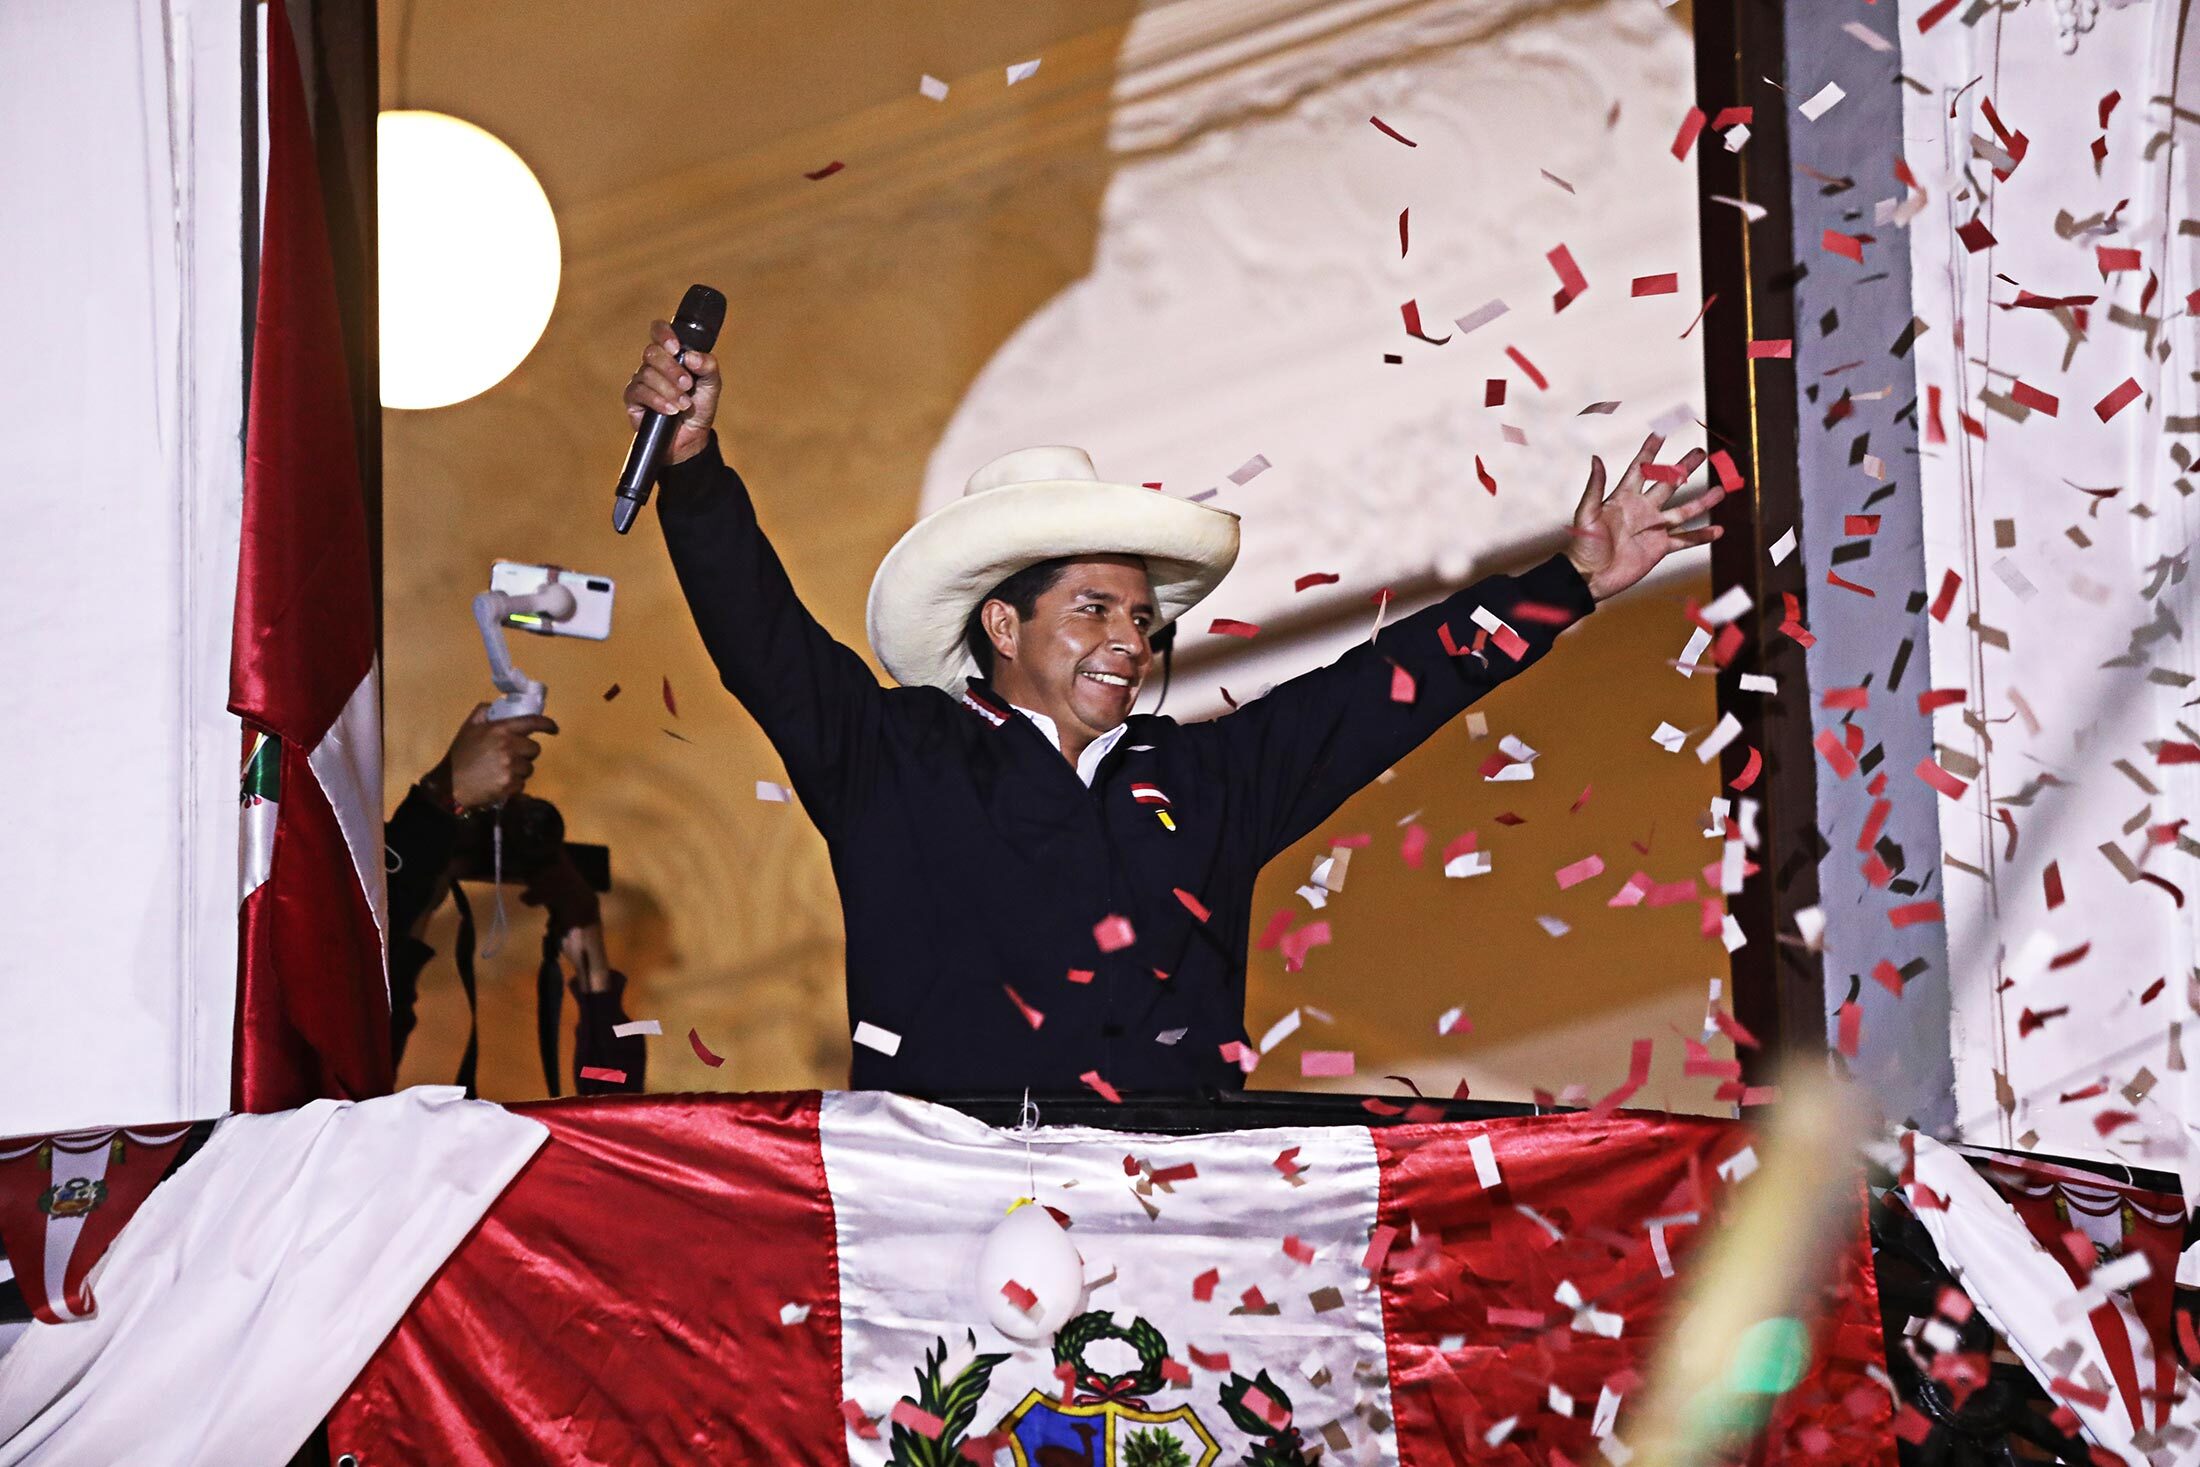 Peruvian&nbsp;presidential candidate Pedro Castillo&nbsp;talks to supporters at his party’s headquarters in Lima on June 8.